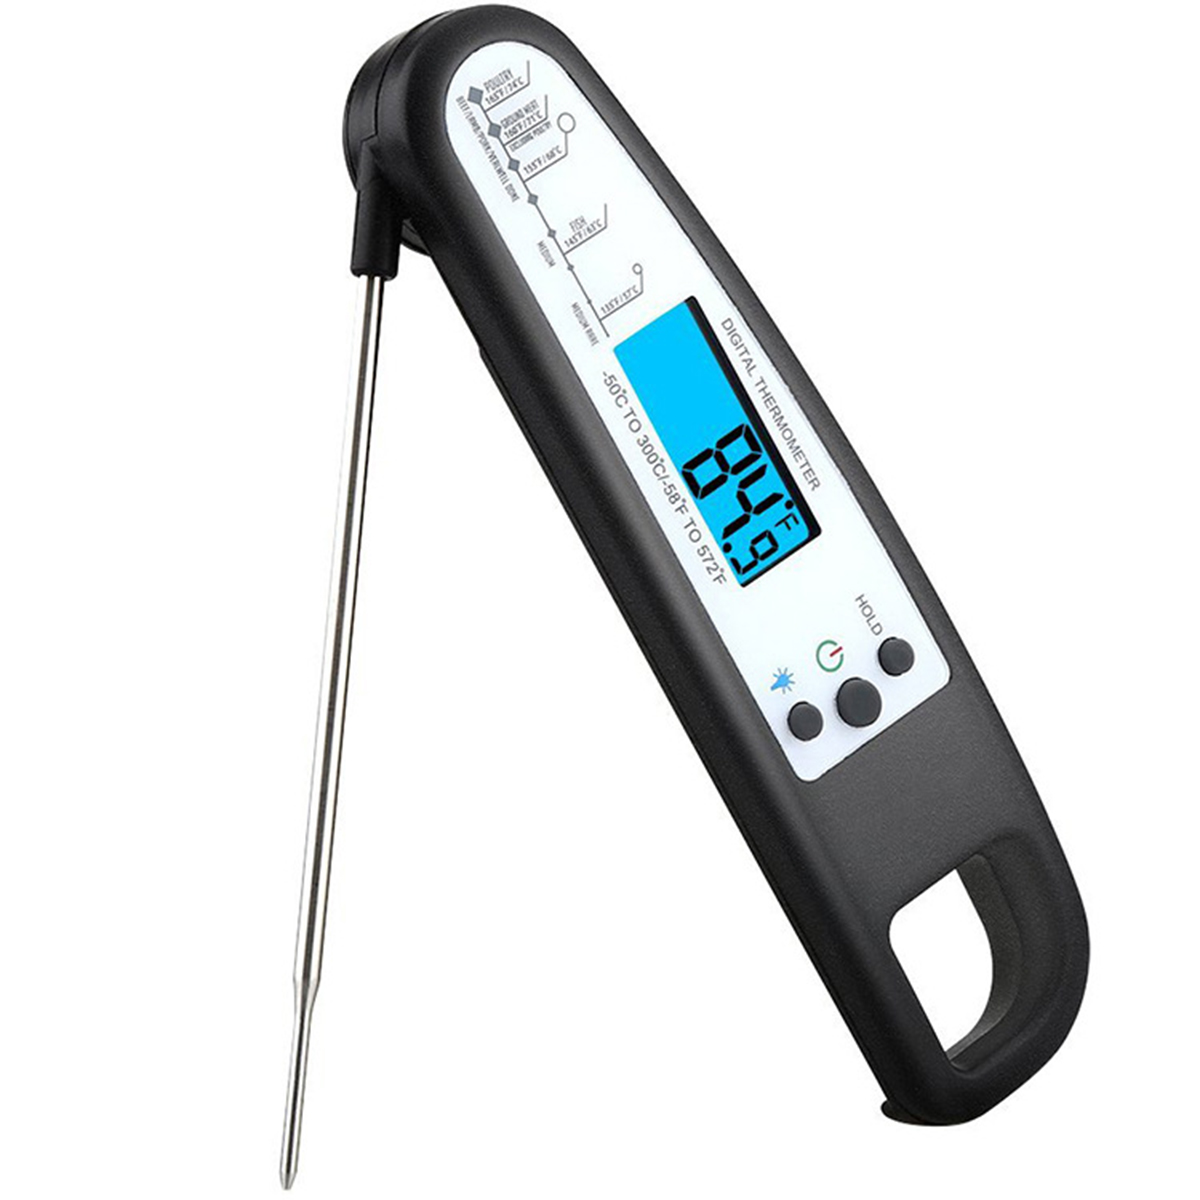 Digital Rotatable Instant Read Food Meat Thermometer w/ Probe for Cooking BBQ Grill Kitchen - Black